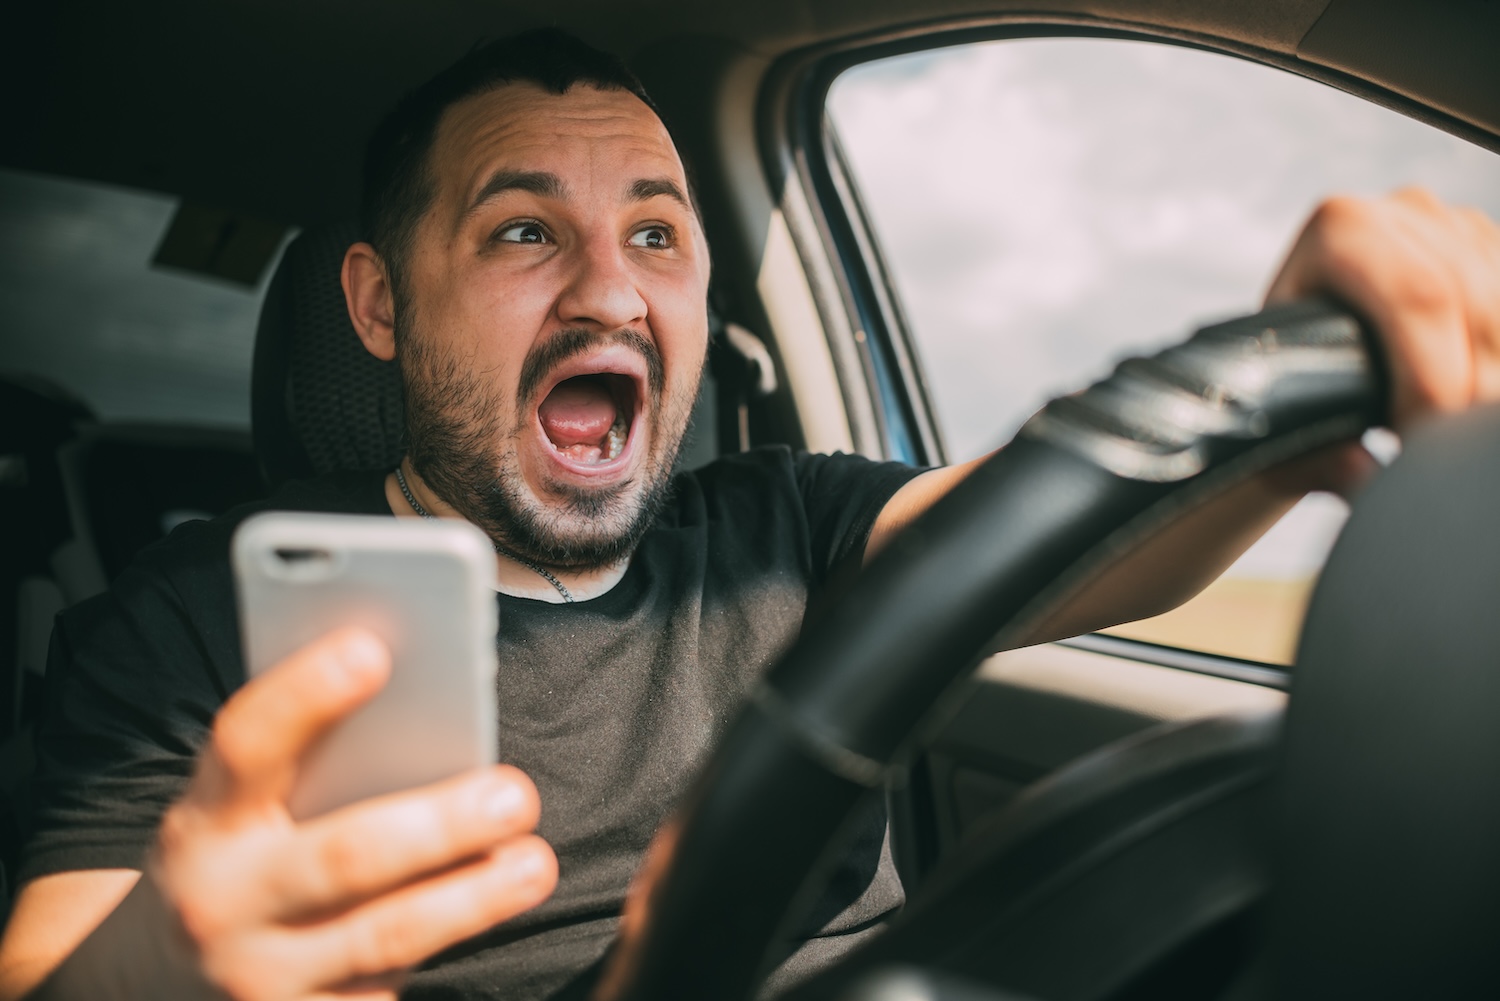 Texting While Driving – The Dangers